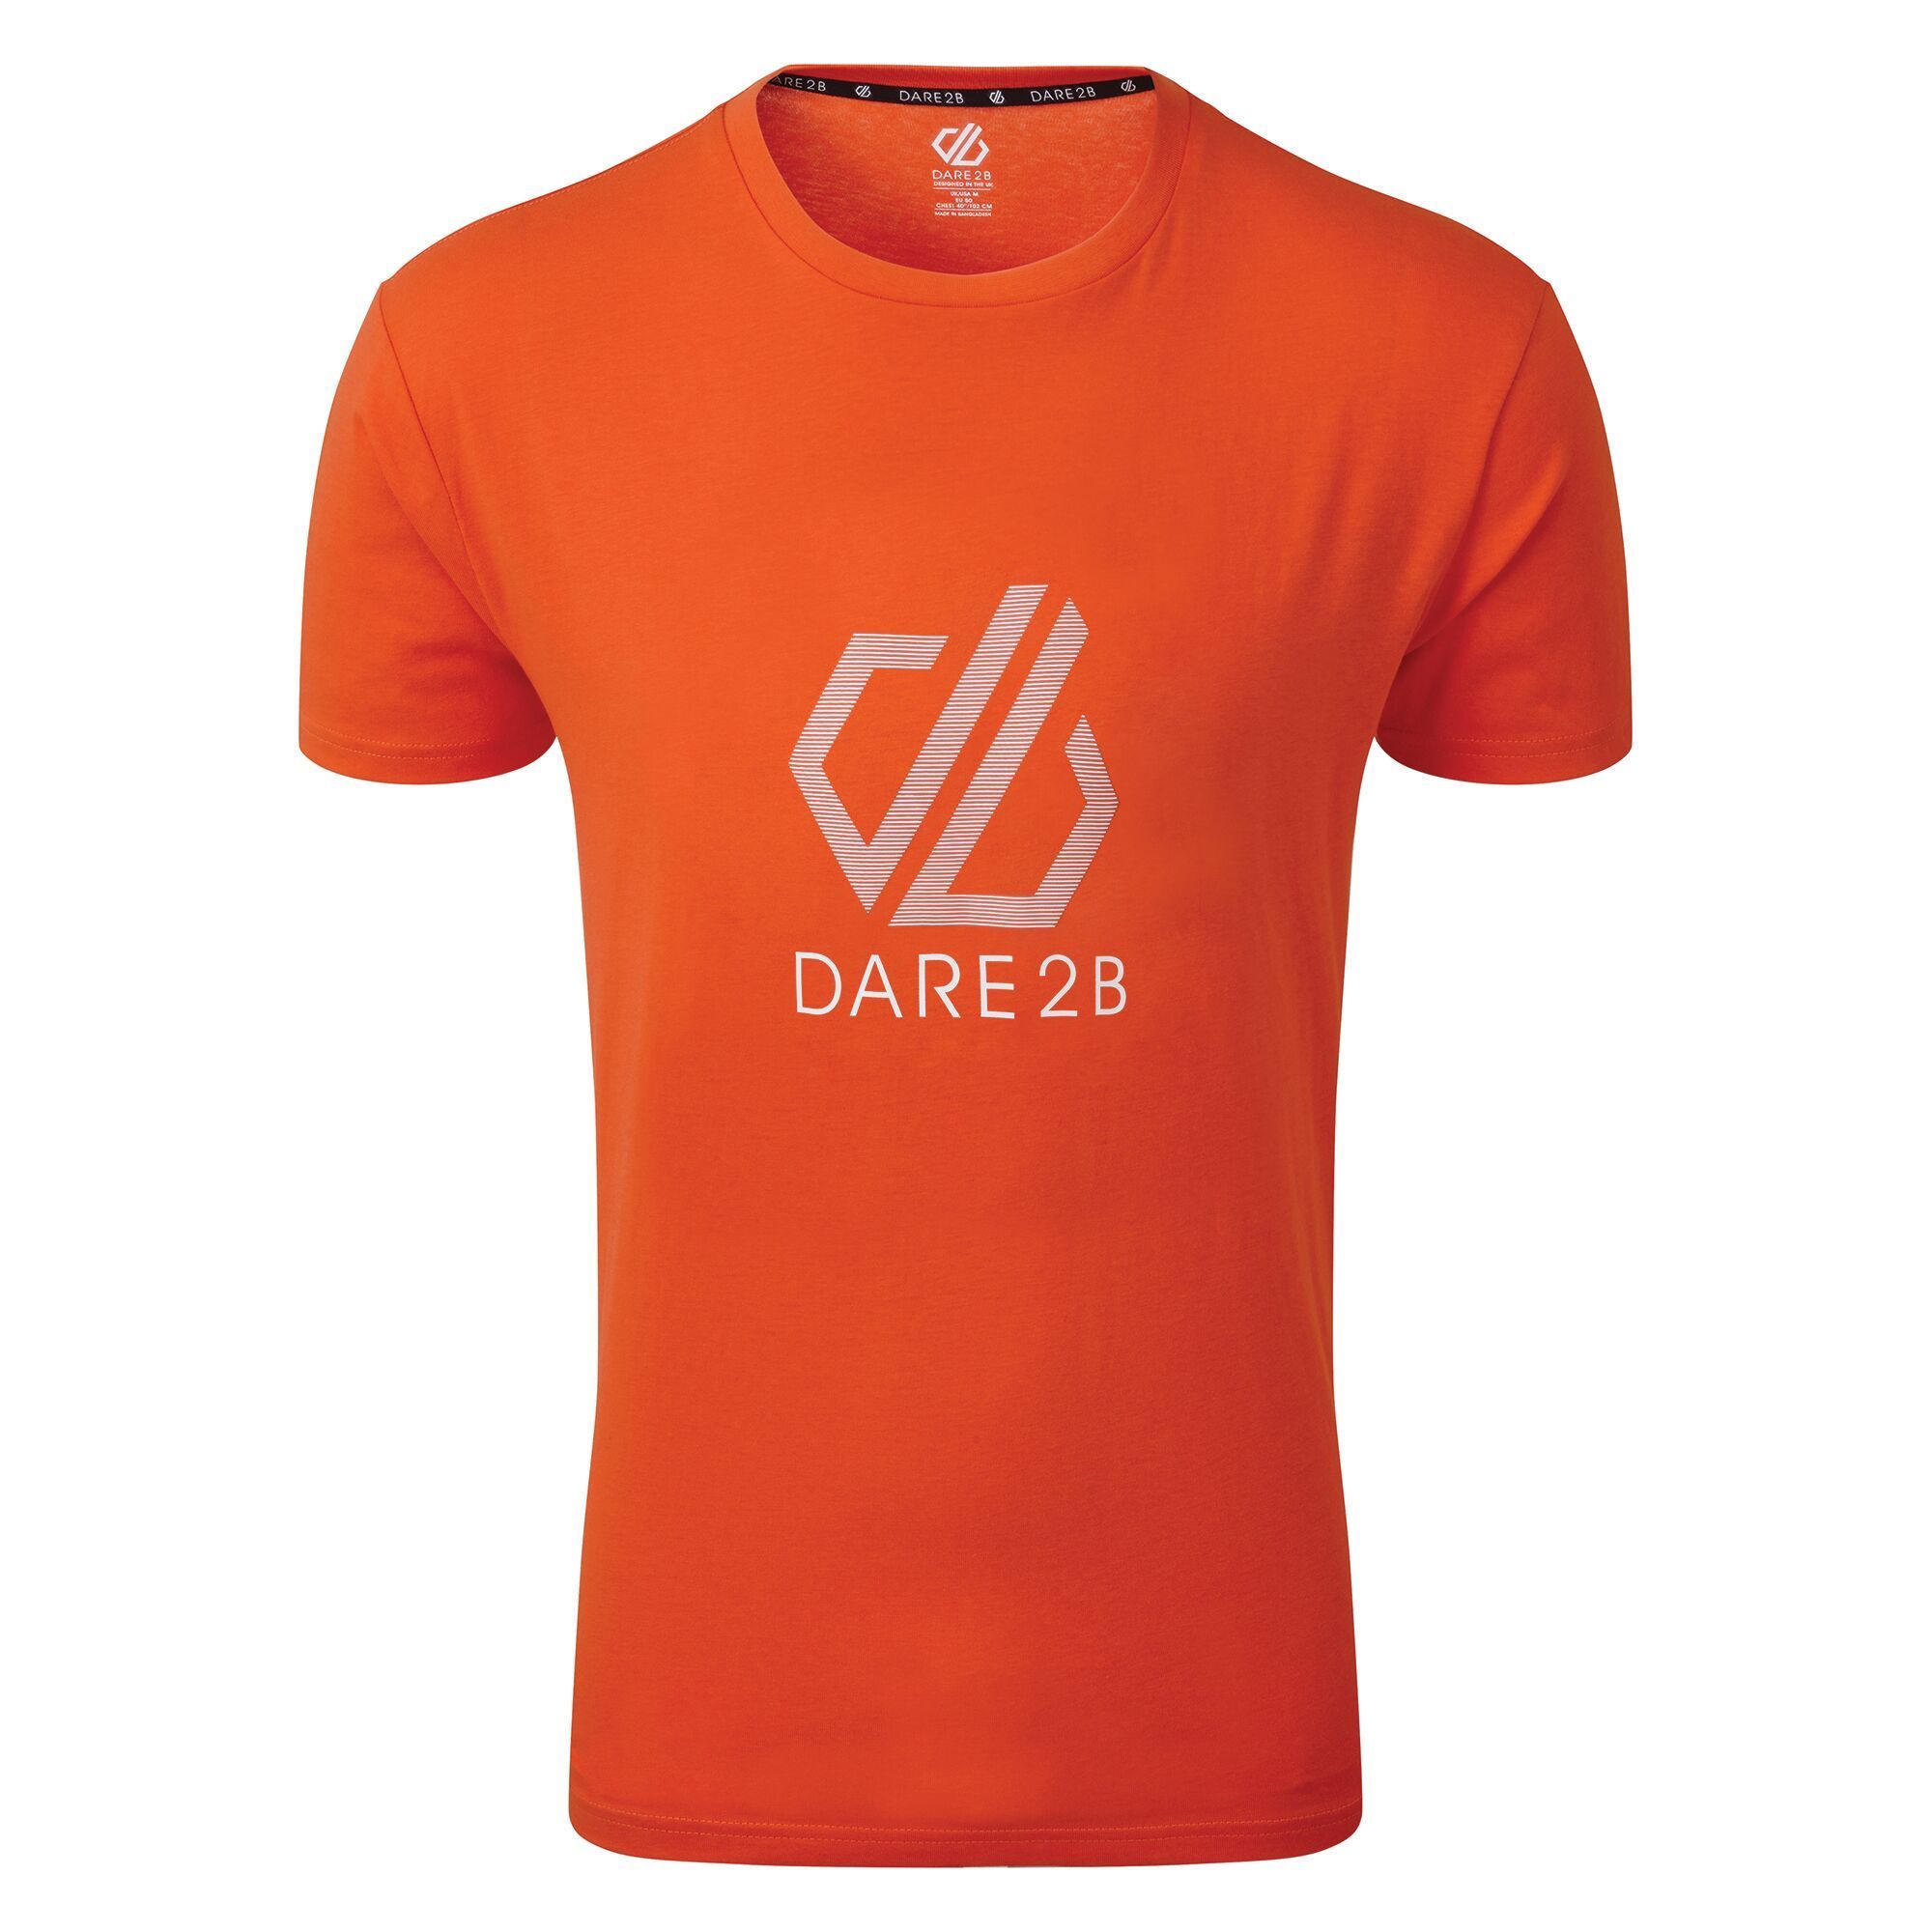 Material: 100% Cotton. Short sleeved t-shirt with ribbed collar. Features the Dare 2B logo on the front as a graphic print.